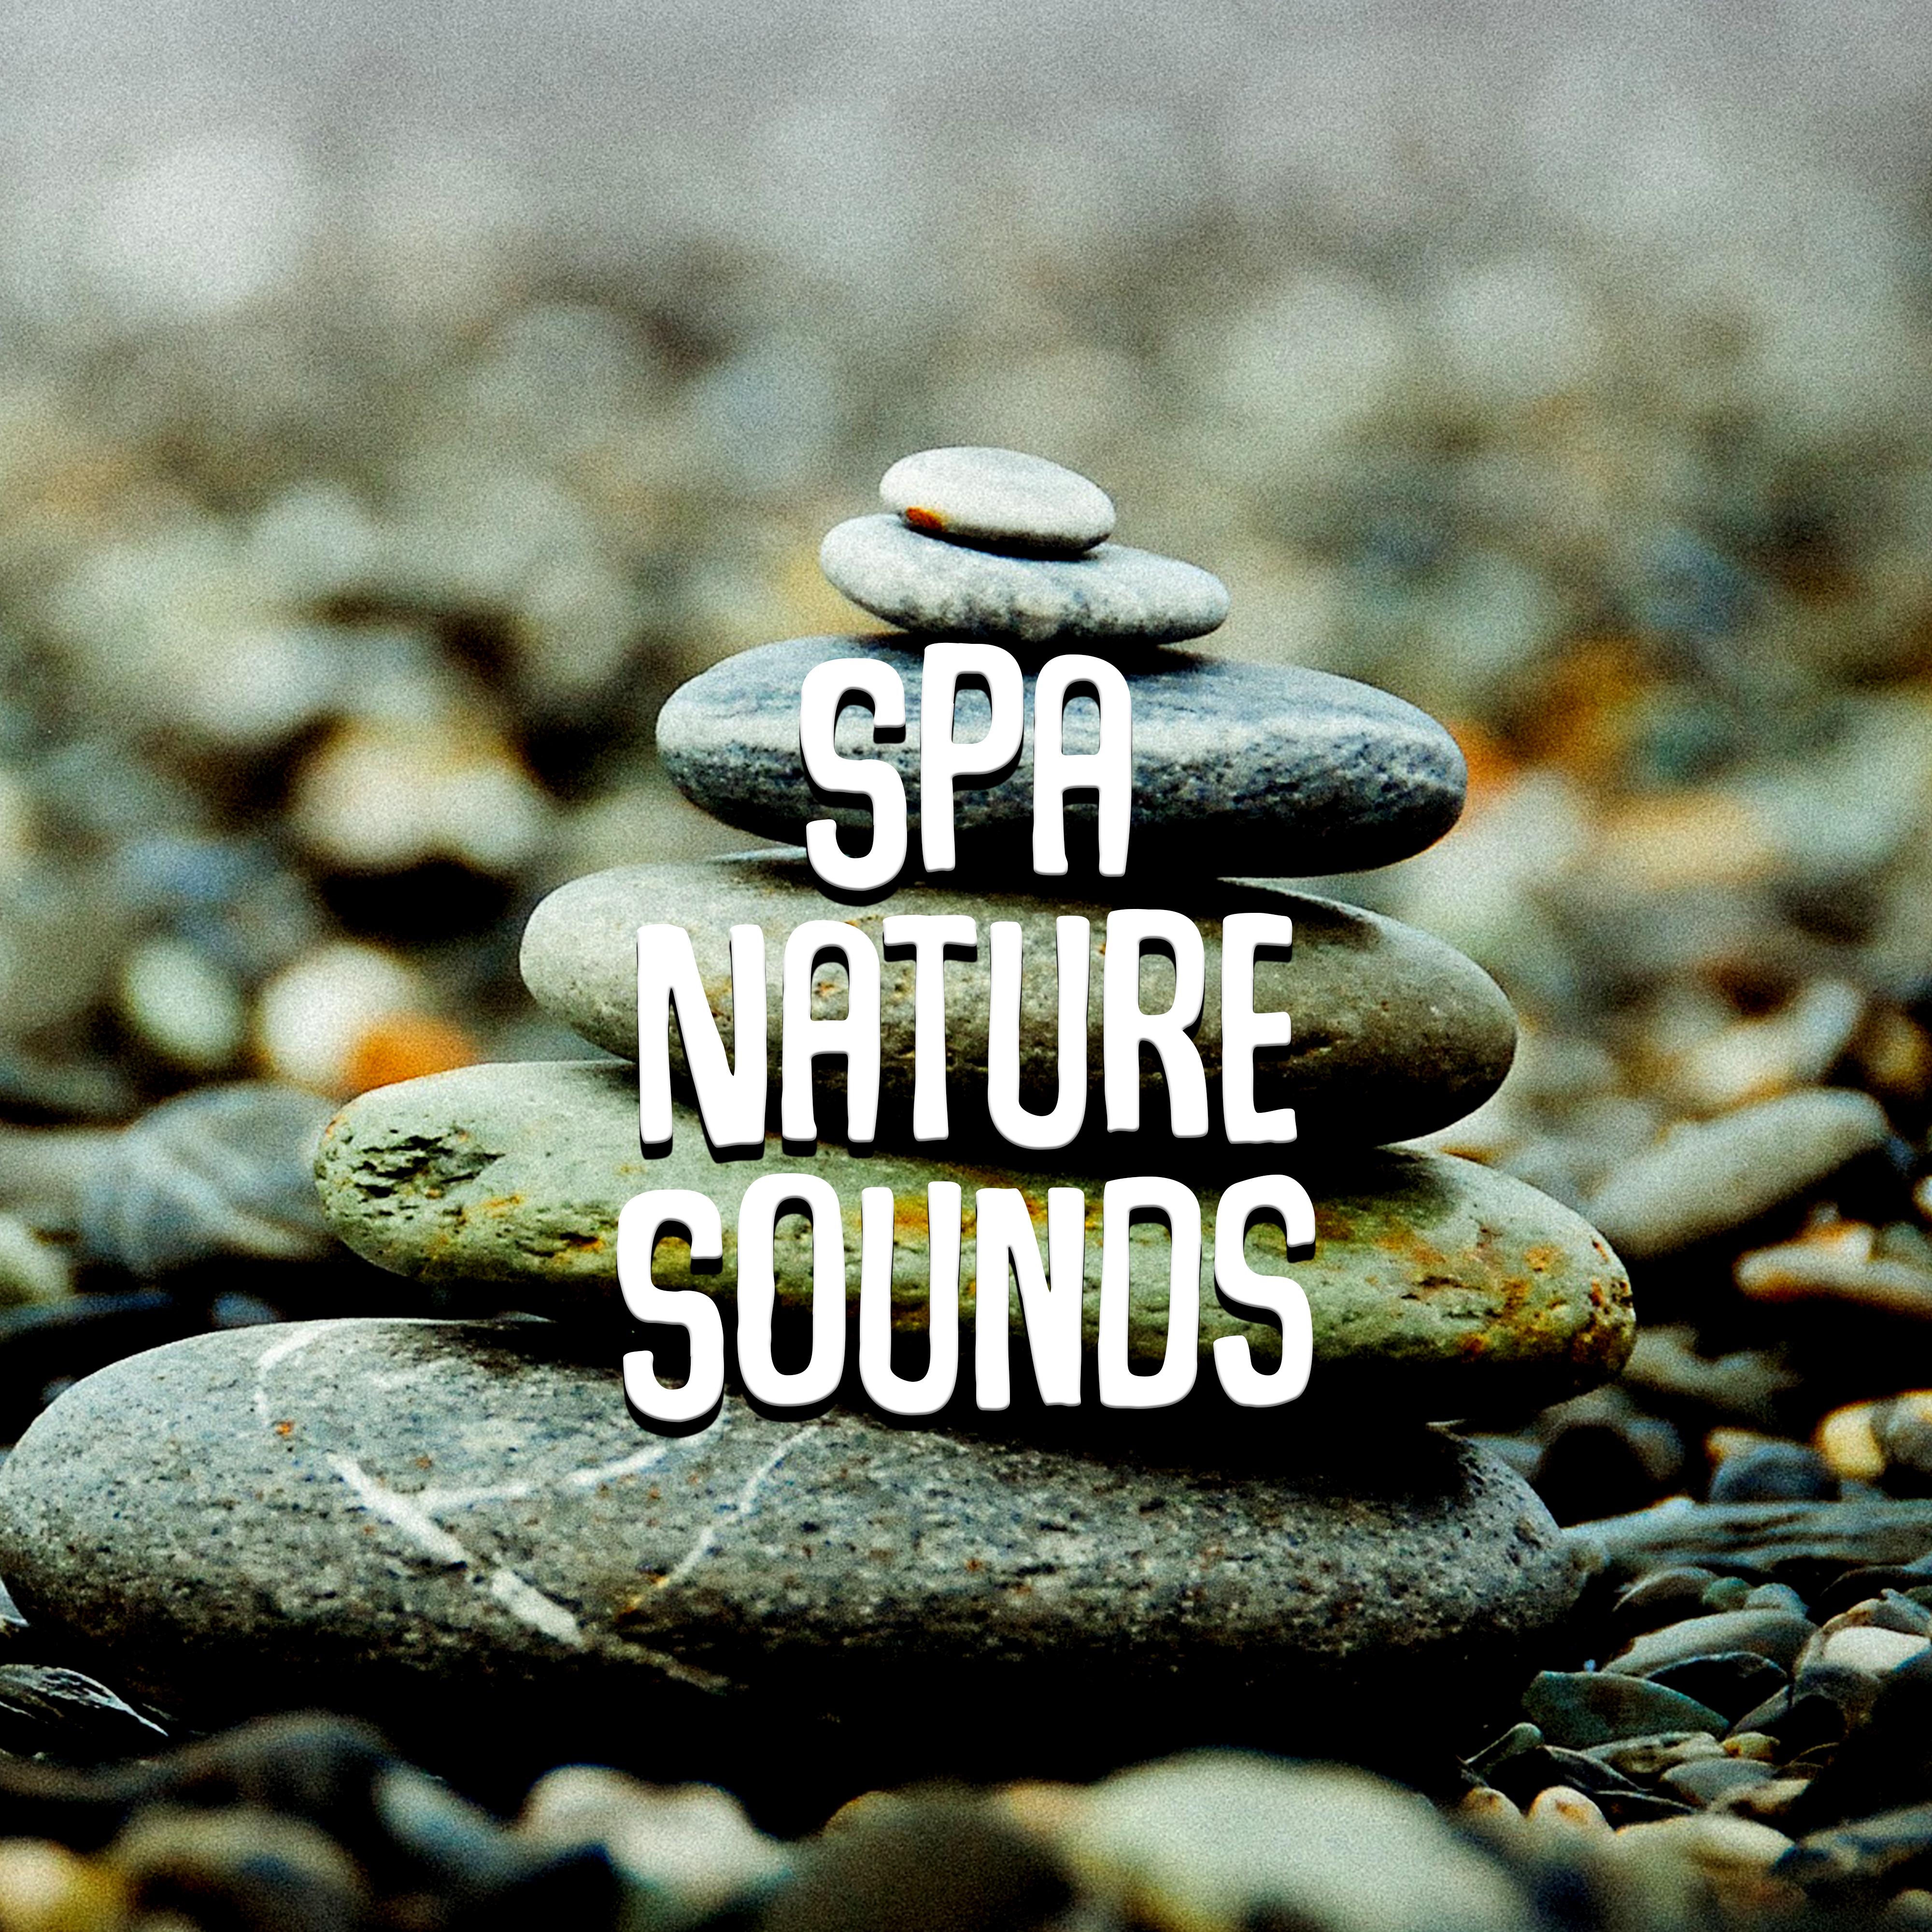 Spa Nature Sounds – Relaxation Sounds for Wellness, Spa, Calm Nature Sounds, Calming Water, Peaceful Waves